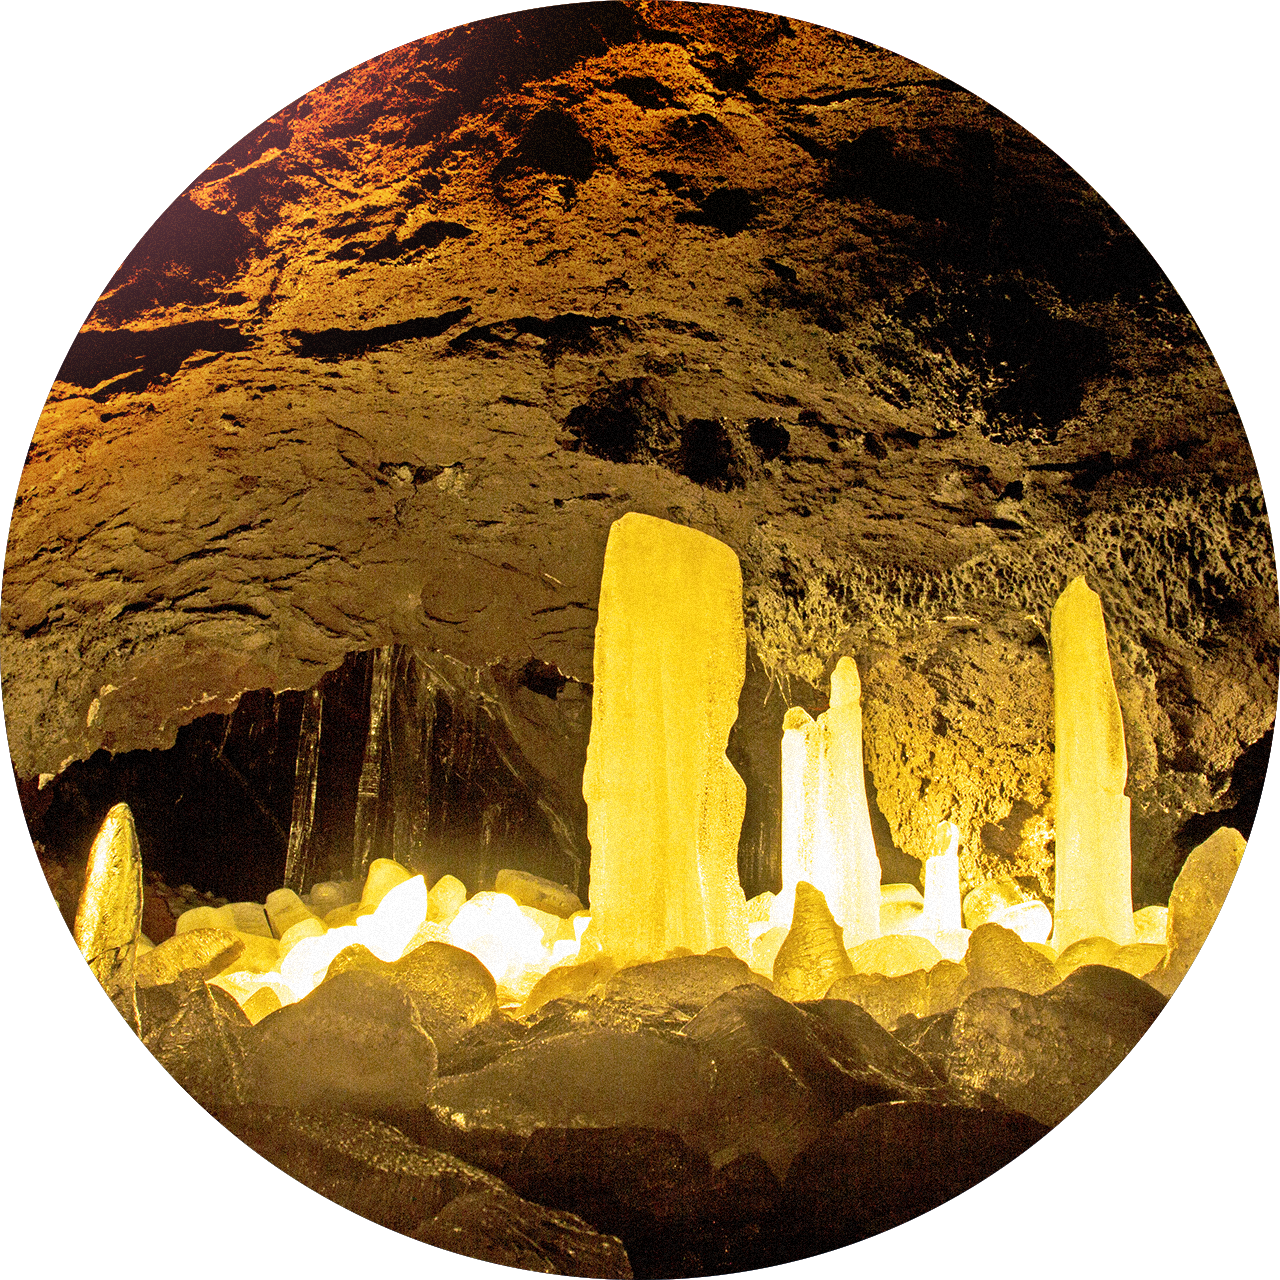 From South Korea to Japan, students will get a unique view of familiar sites, such as visiting these caves located beneath Mount Fuji.